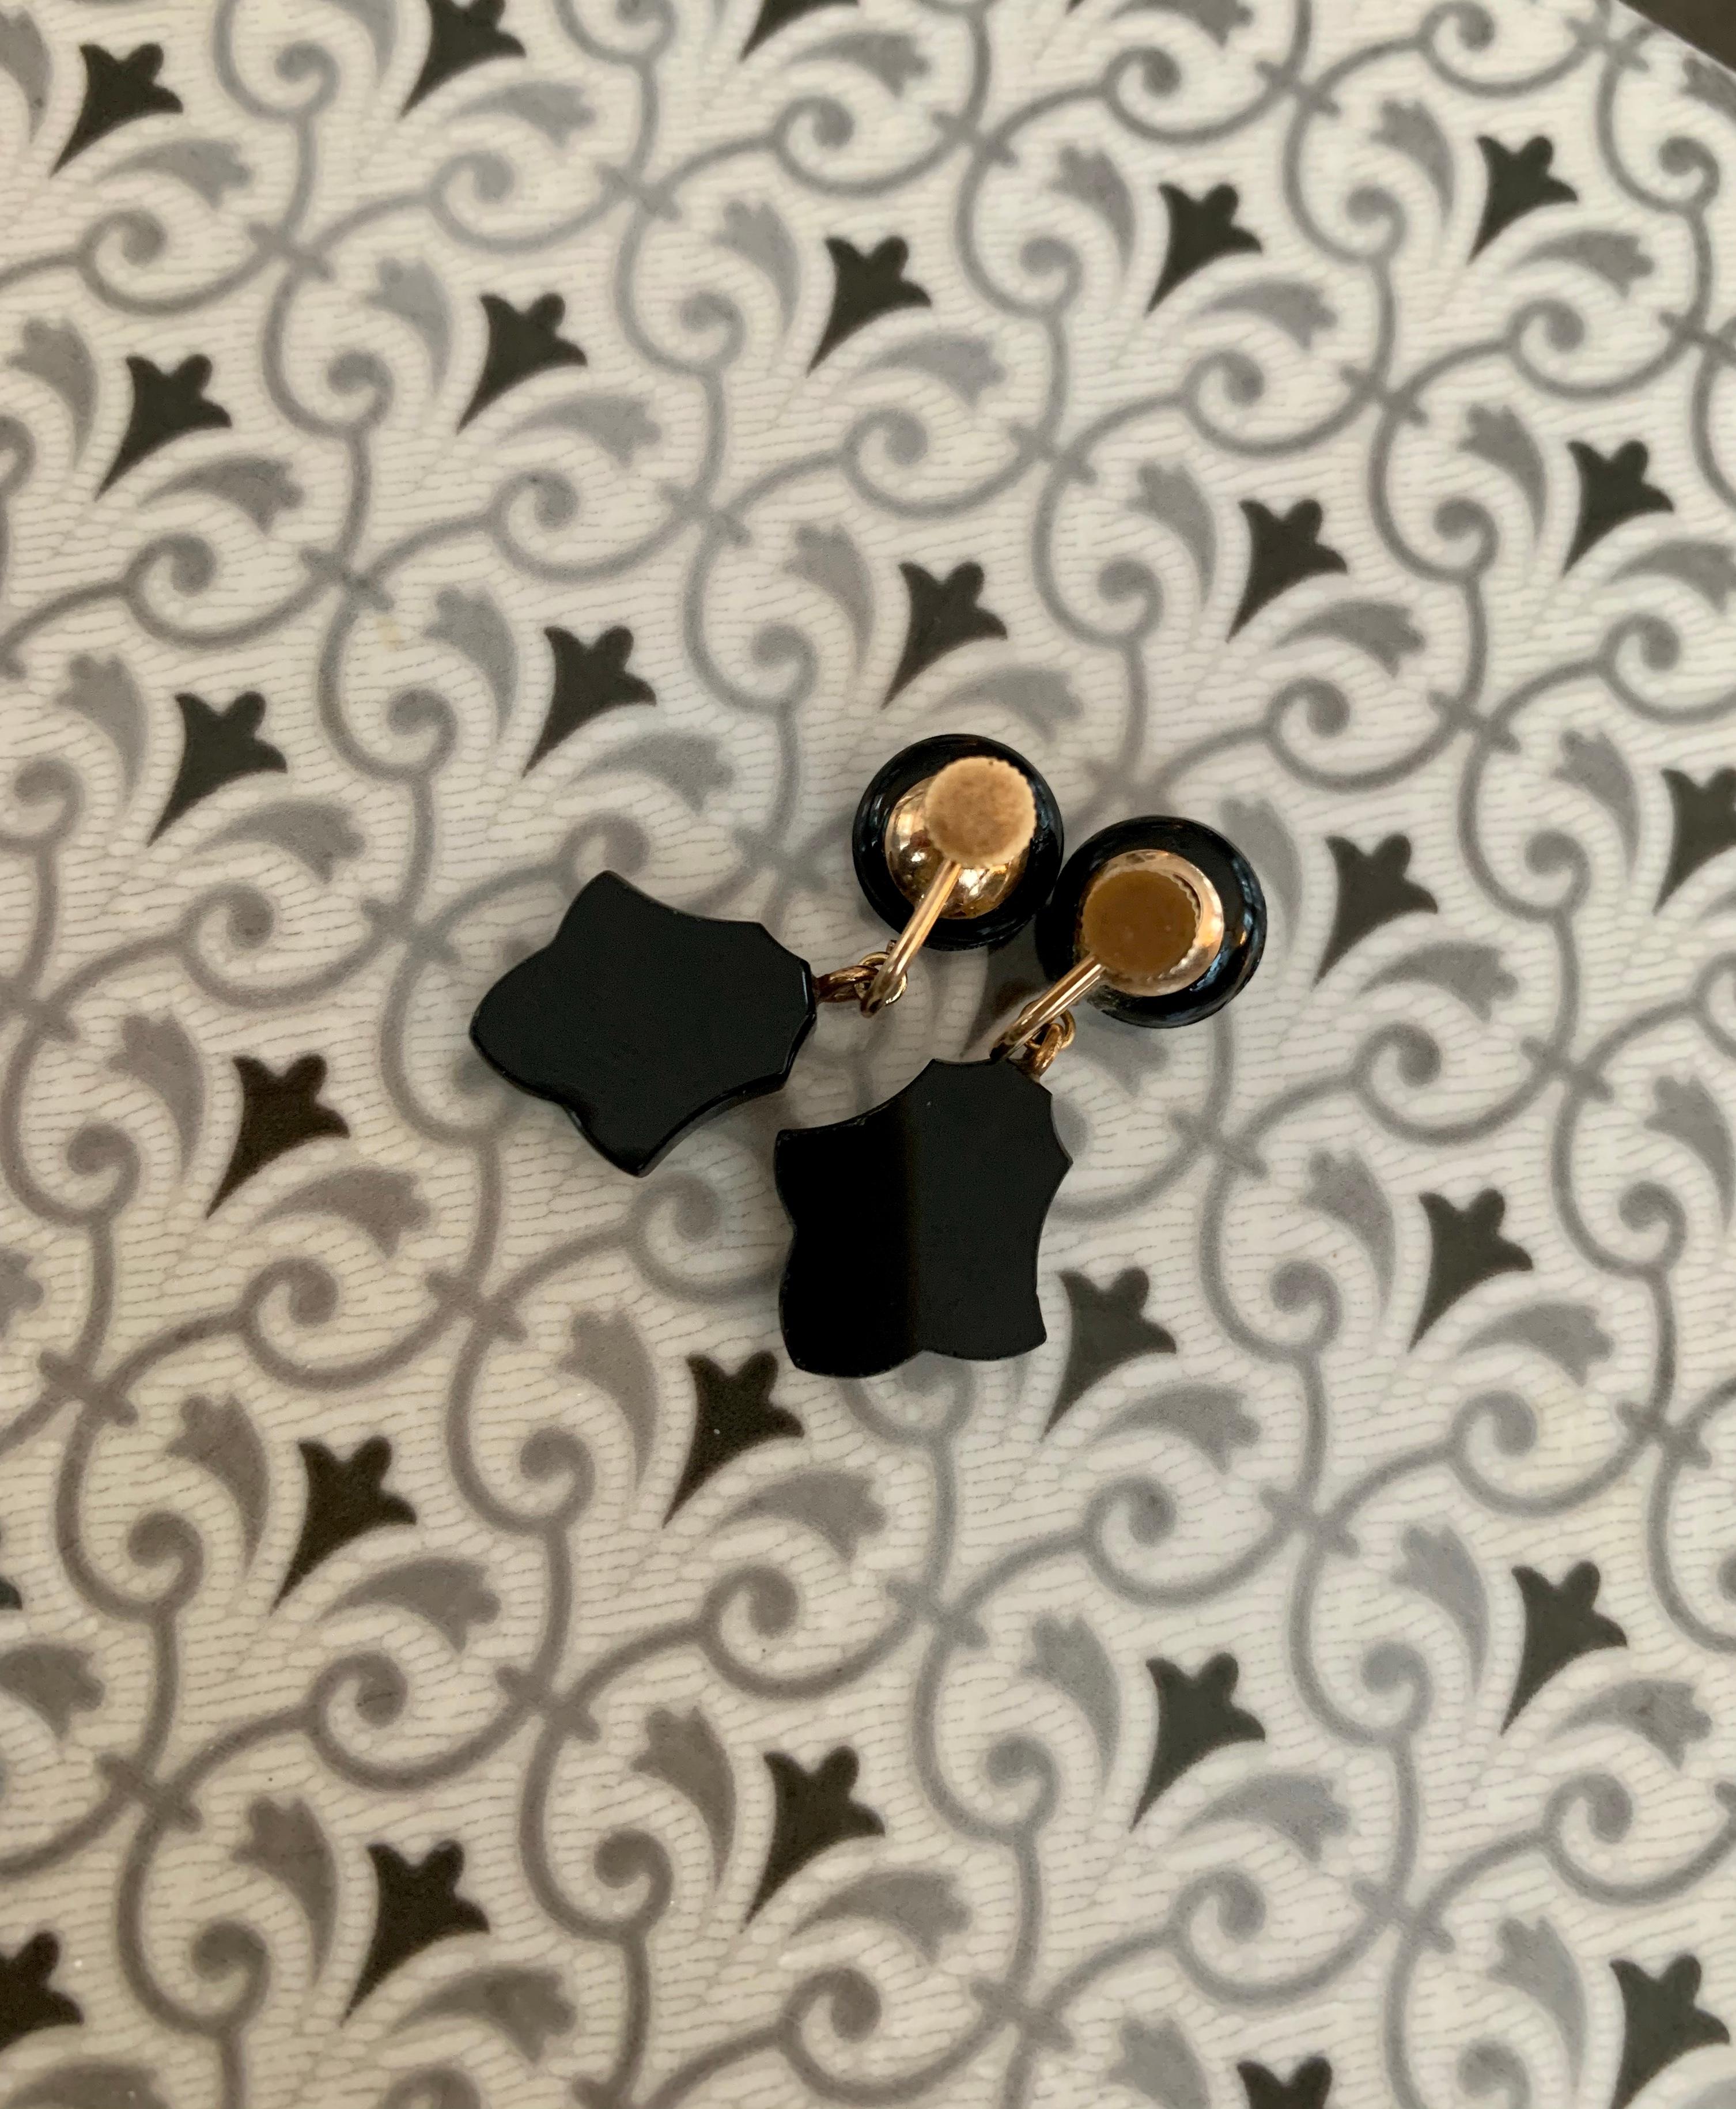 These vintage (pre-1930's) drop earrings feature beautiful pieces of black Onyx hanging from a round, faceted button of Onyx which sits on the wearer's earlobe.  The closure is a screw back, but could easily be converted to a post or wire for